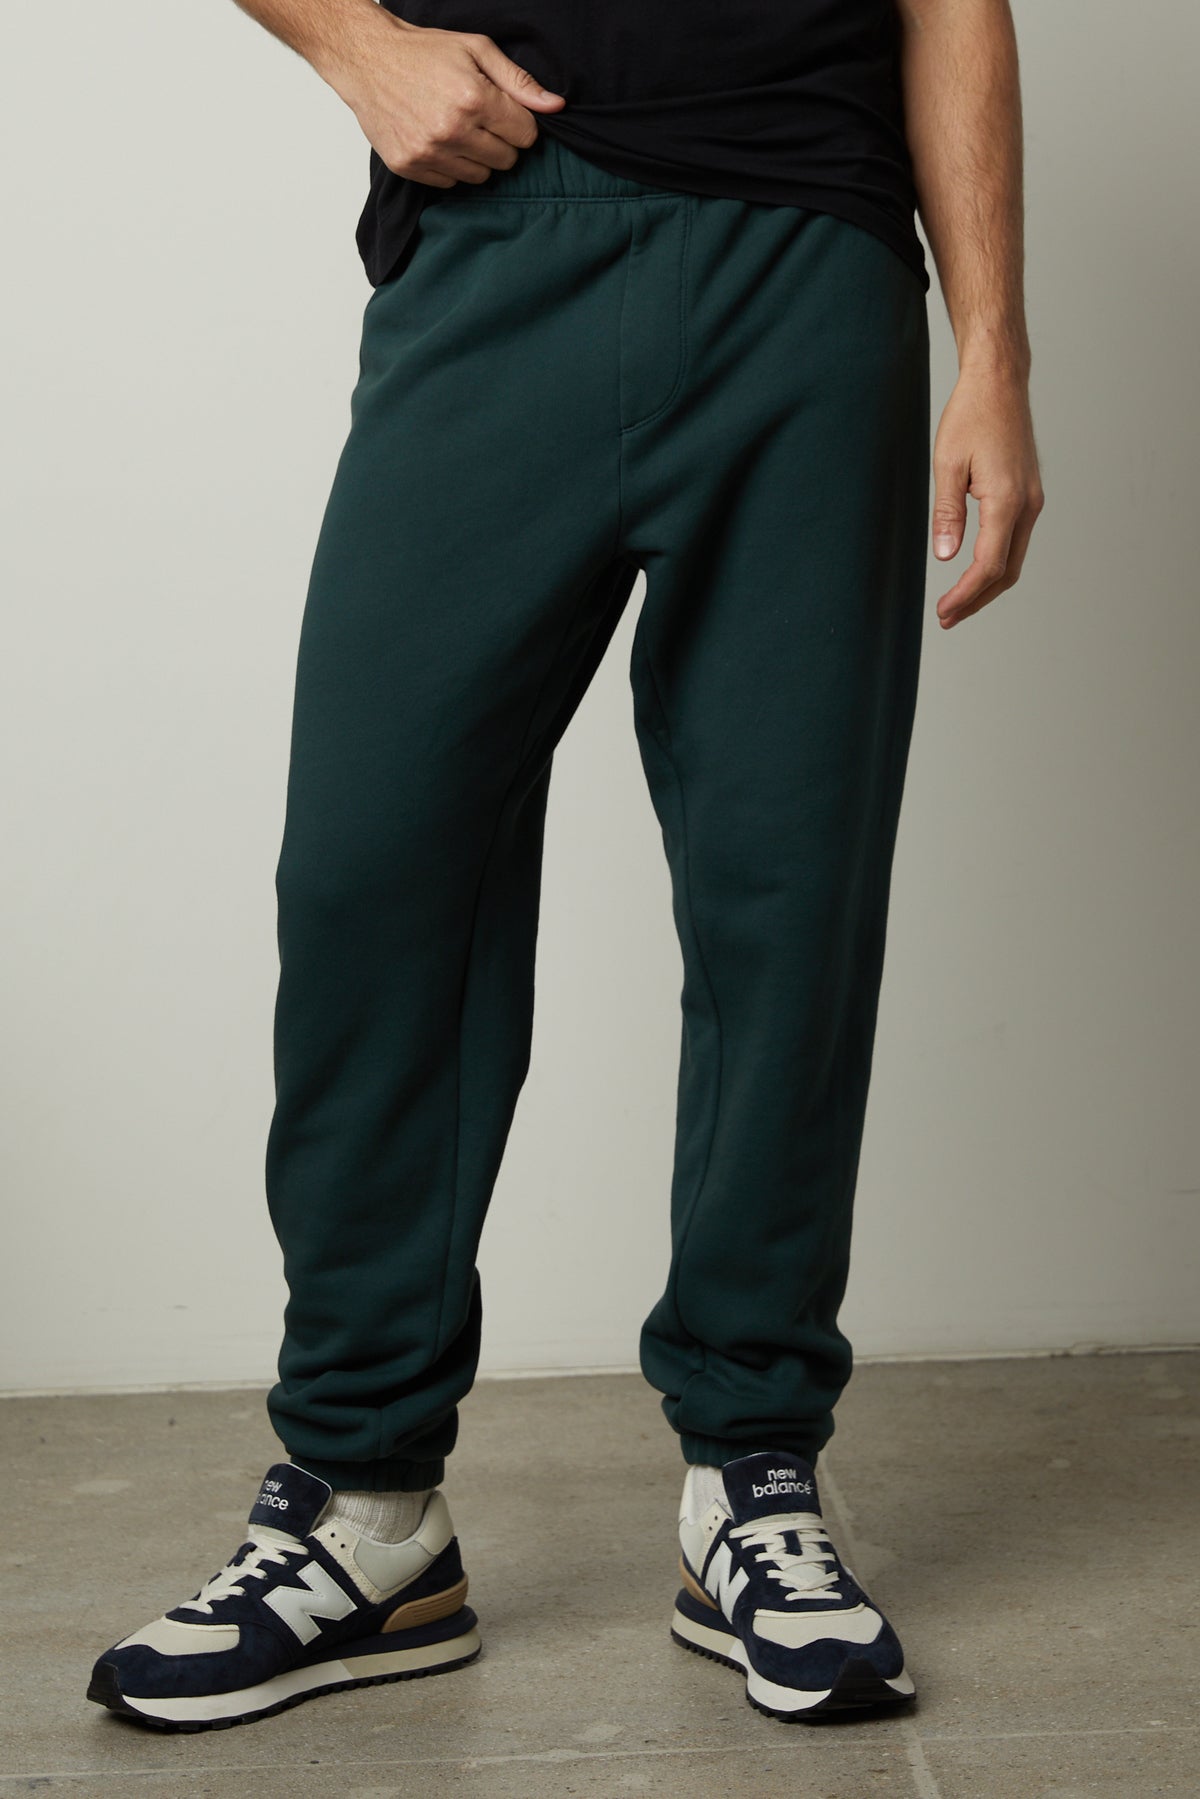   A man wearing Velvet by Graham & Spencer's MONTGOMERY BRUSHED FLEECE SWEATPANT with elastic waist and cuffs. 